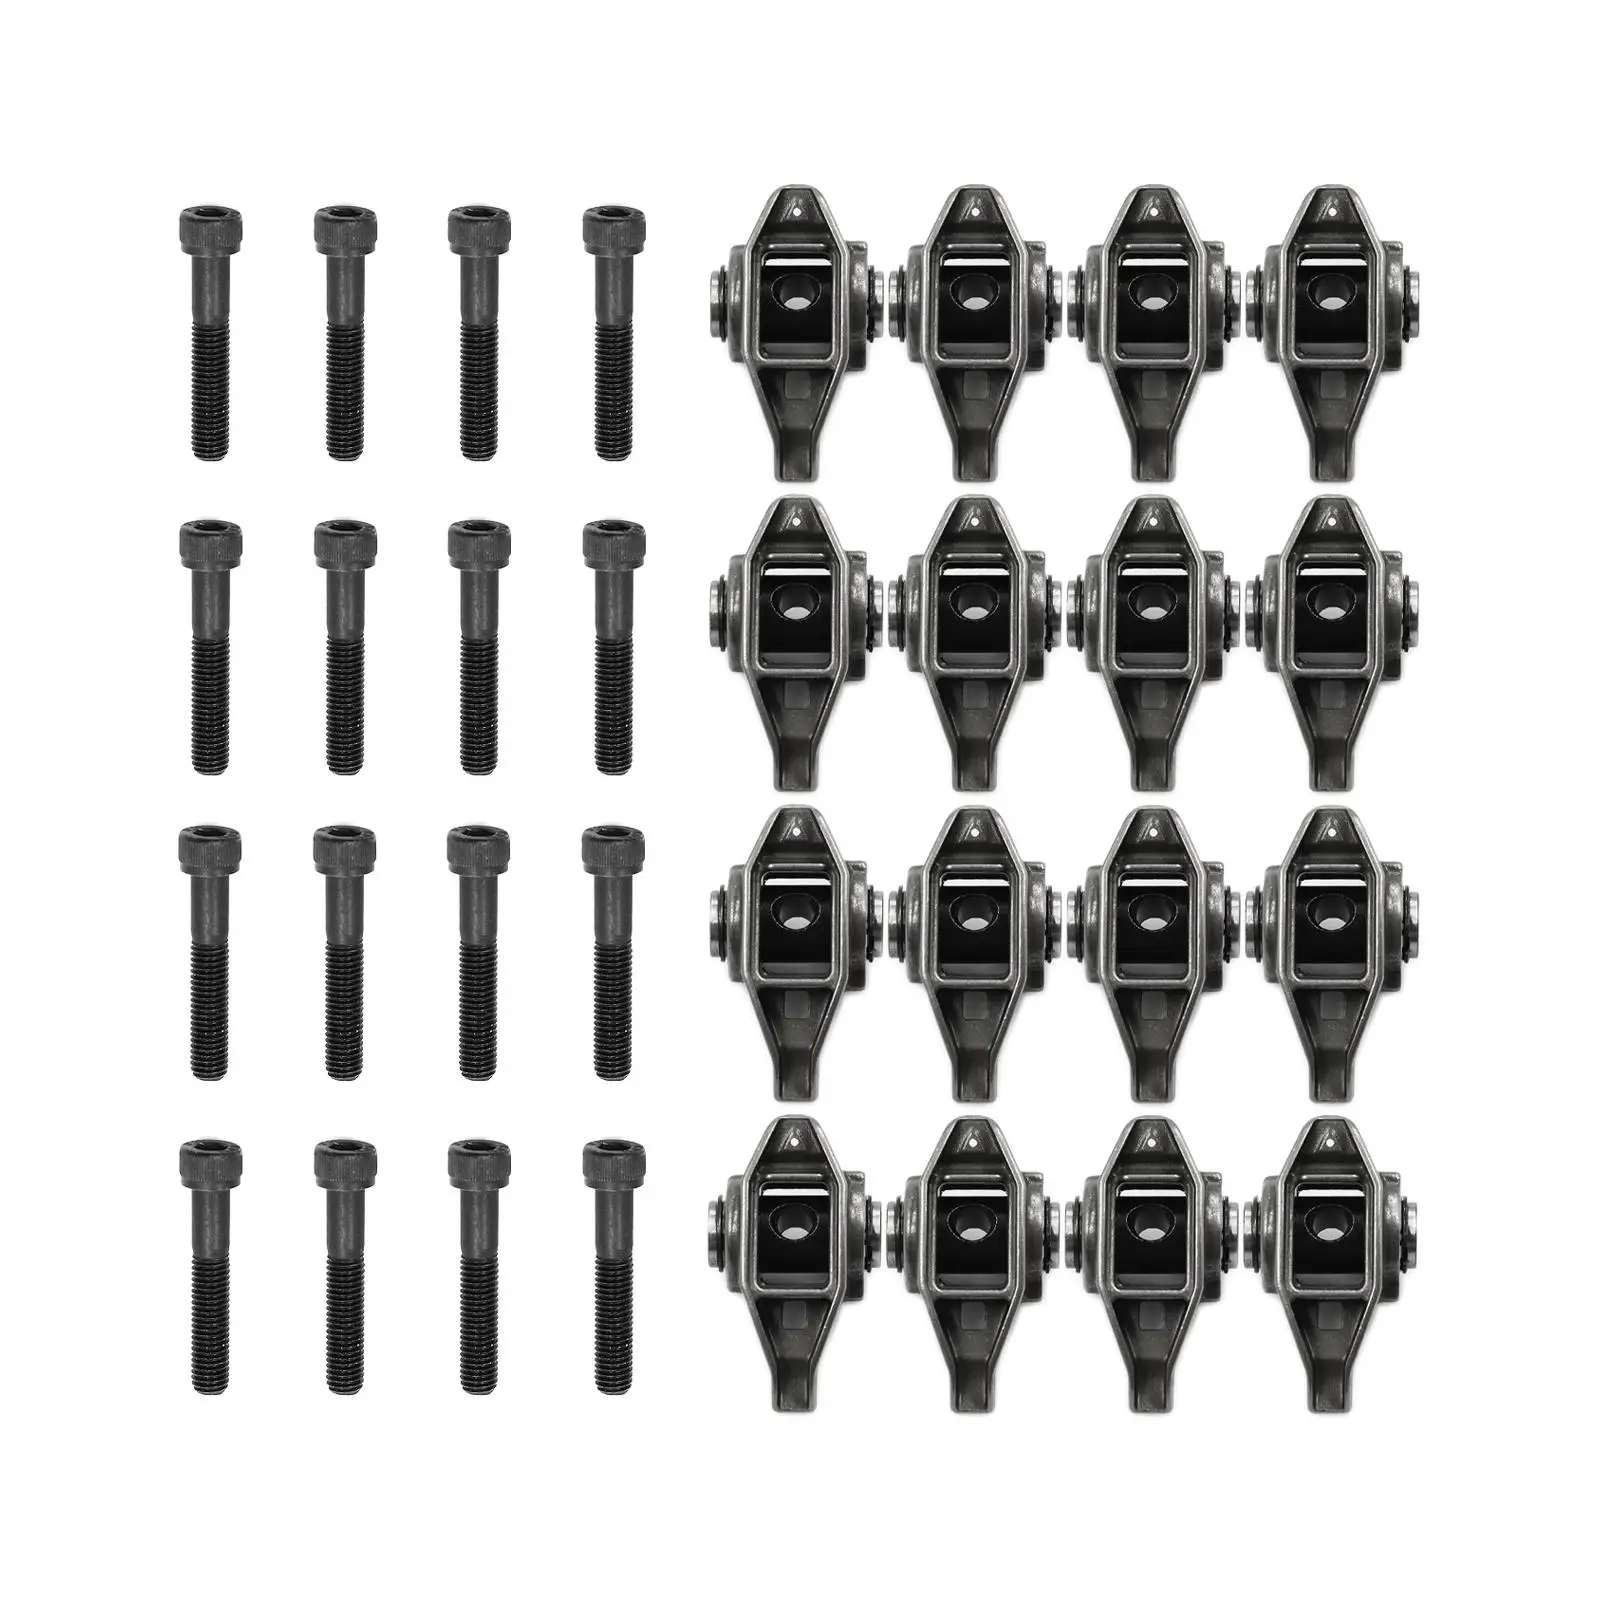 Rocker Arms and Bolts Automotive Accessories Durable Replace Shaft Installed Easily Install Assembly Steel Lifter Engine Valve